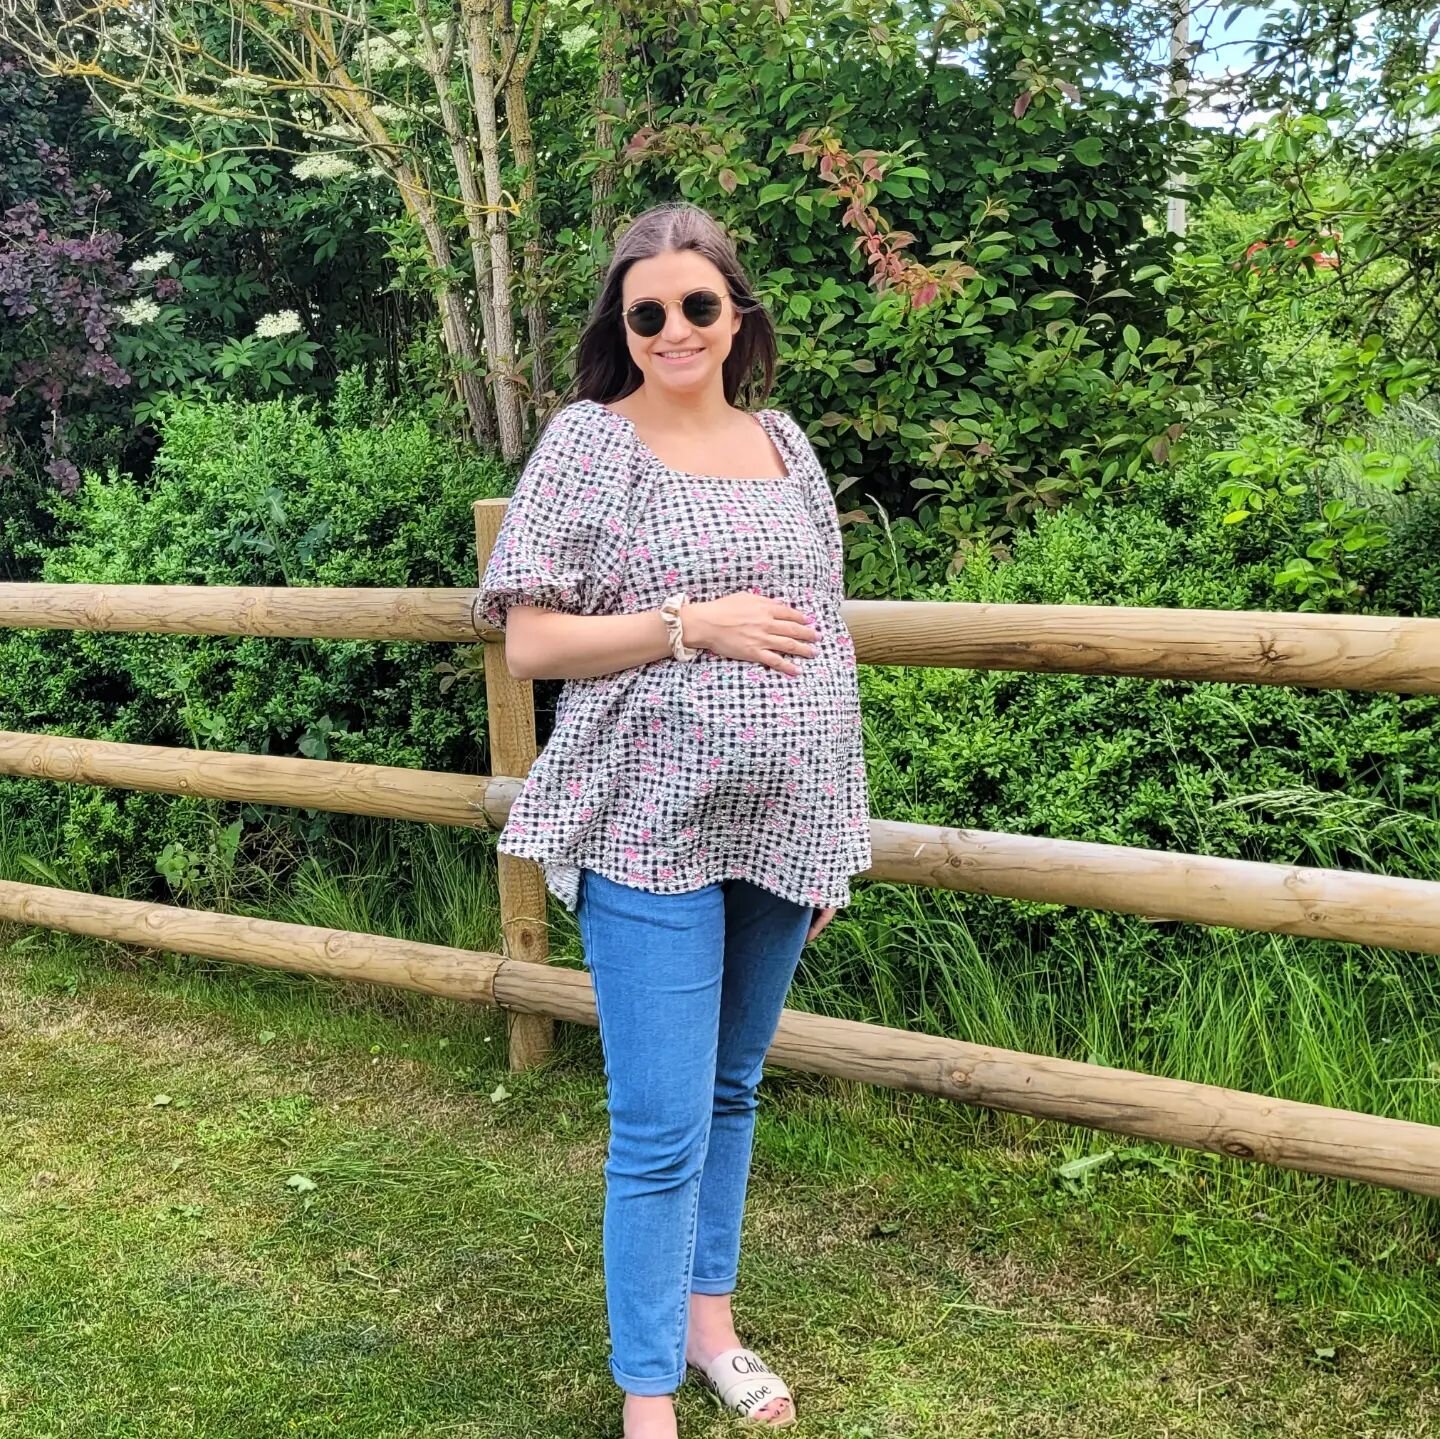 How is it August already?! Is anyone due this month?

July was a very exciting month for me. Three people I know had their babies 🥰 including this gorgeous lady ❤️

Here she is at 8 months pregnant wearing our Gingham smock top - &pound;24

BRB just